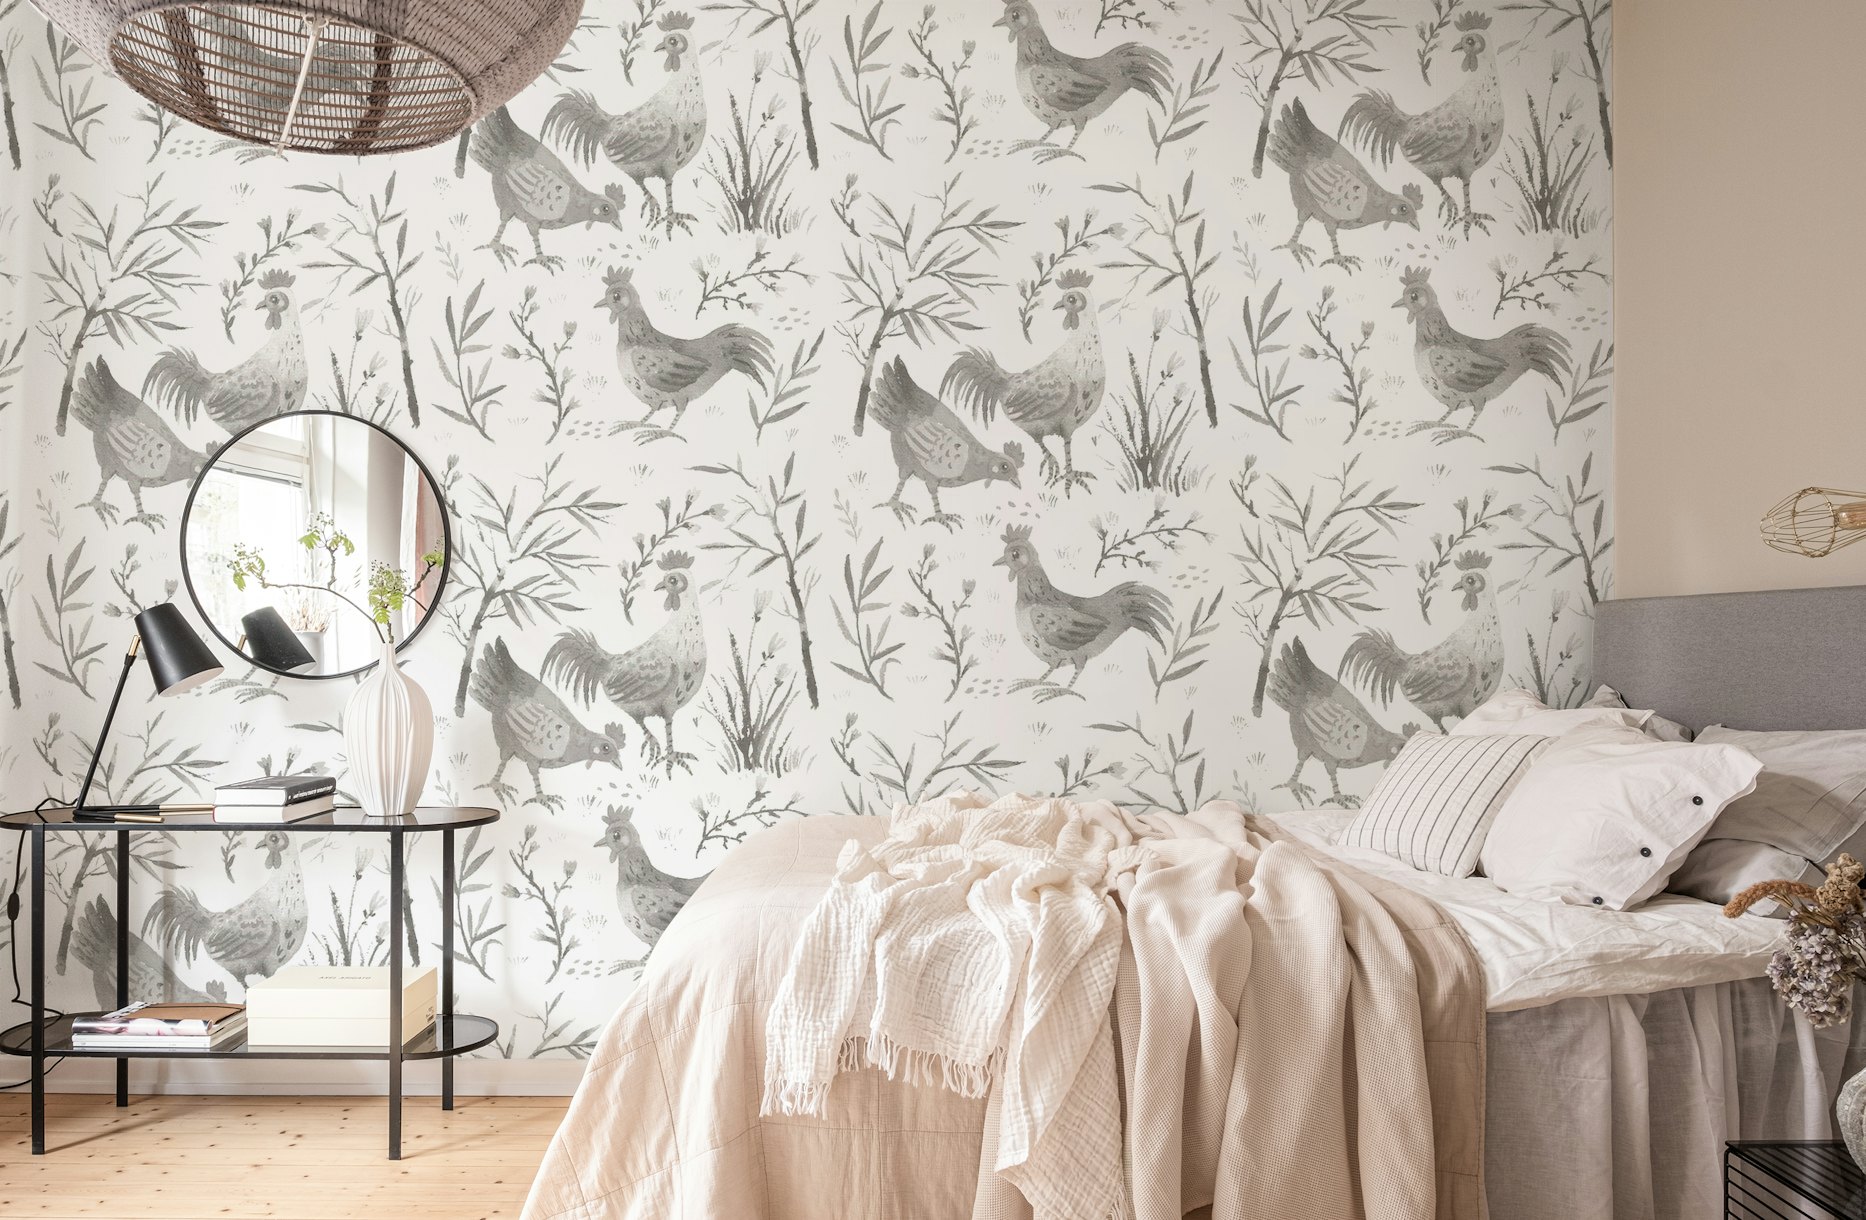 Grey Chickens with Bamboo wallpaper